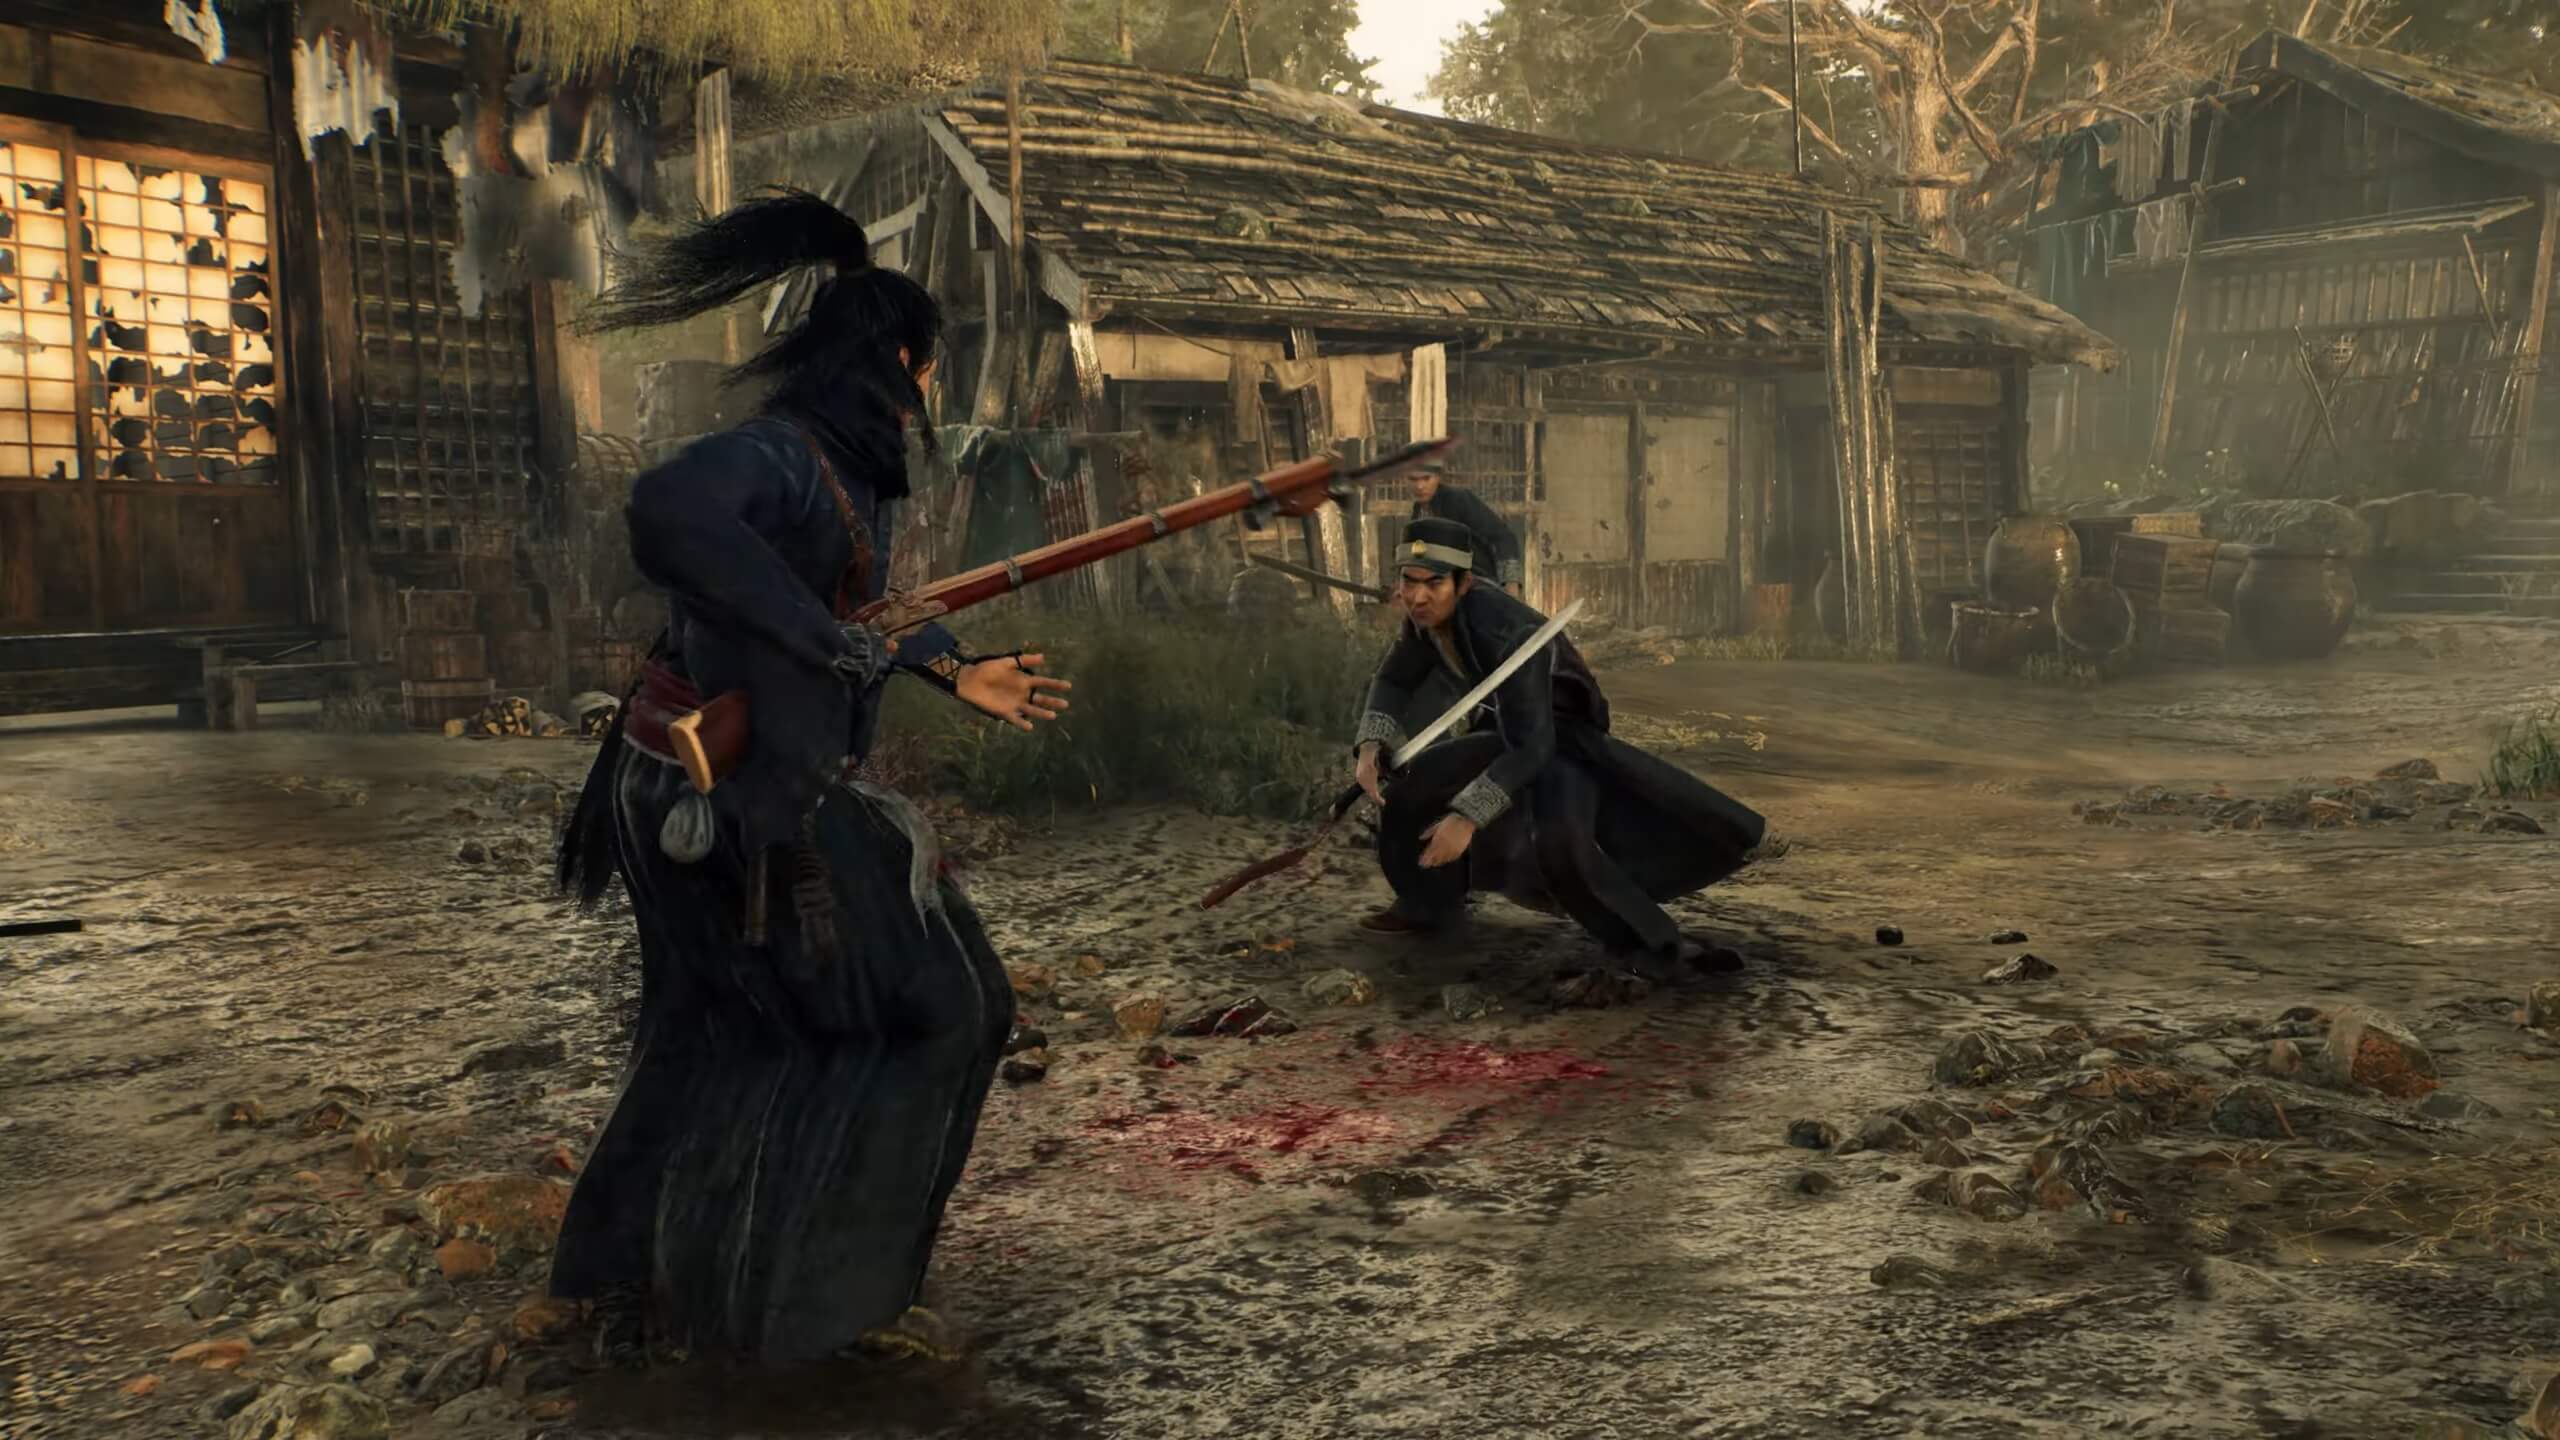 Team Ninja announce new game Rise of the Ronin